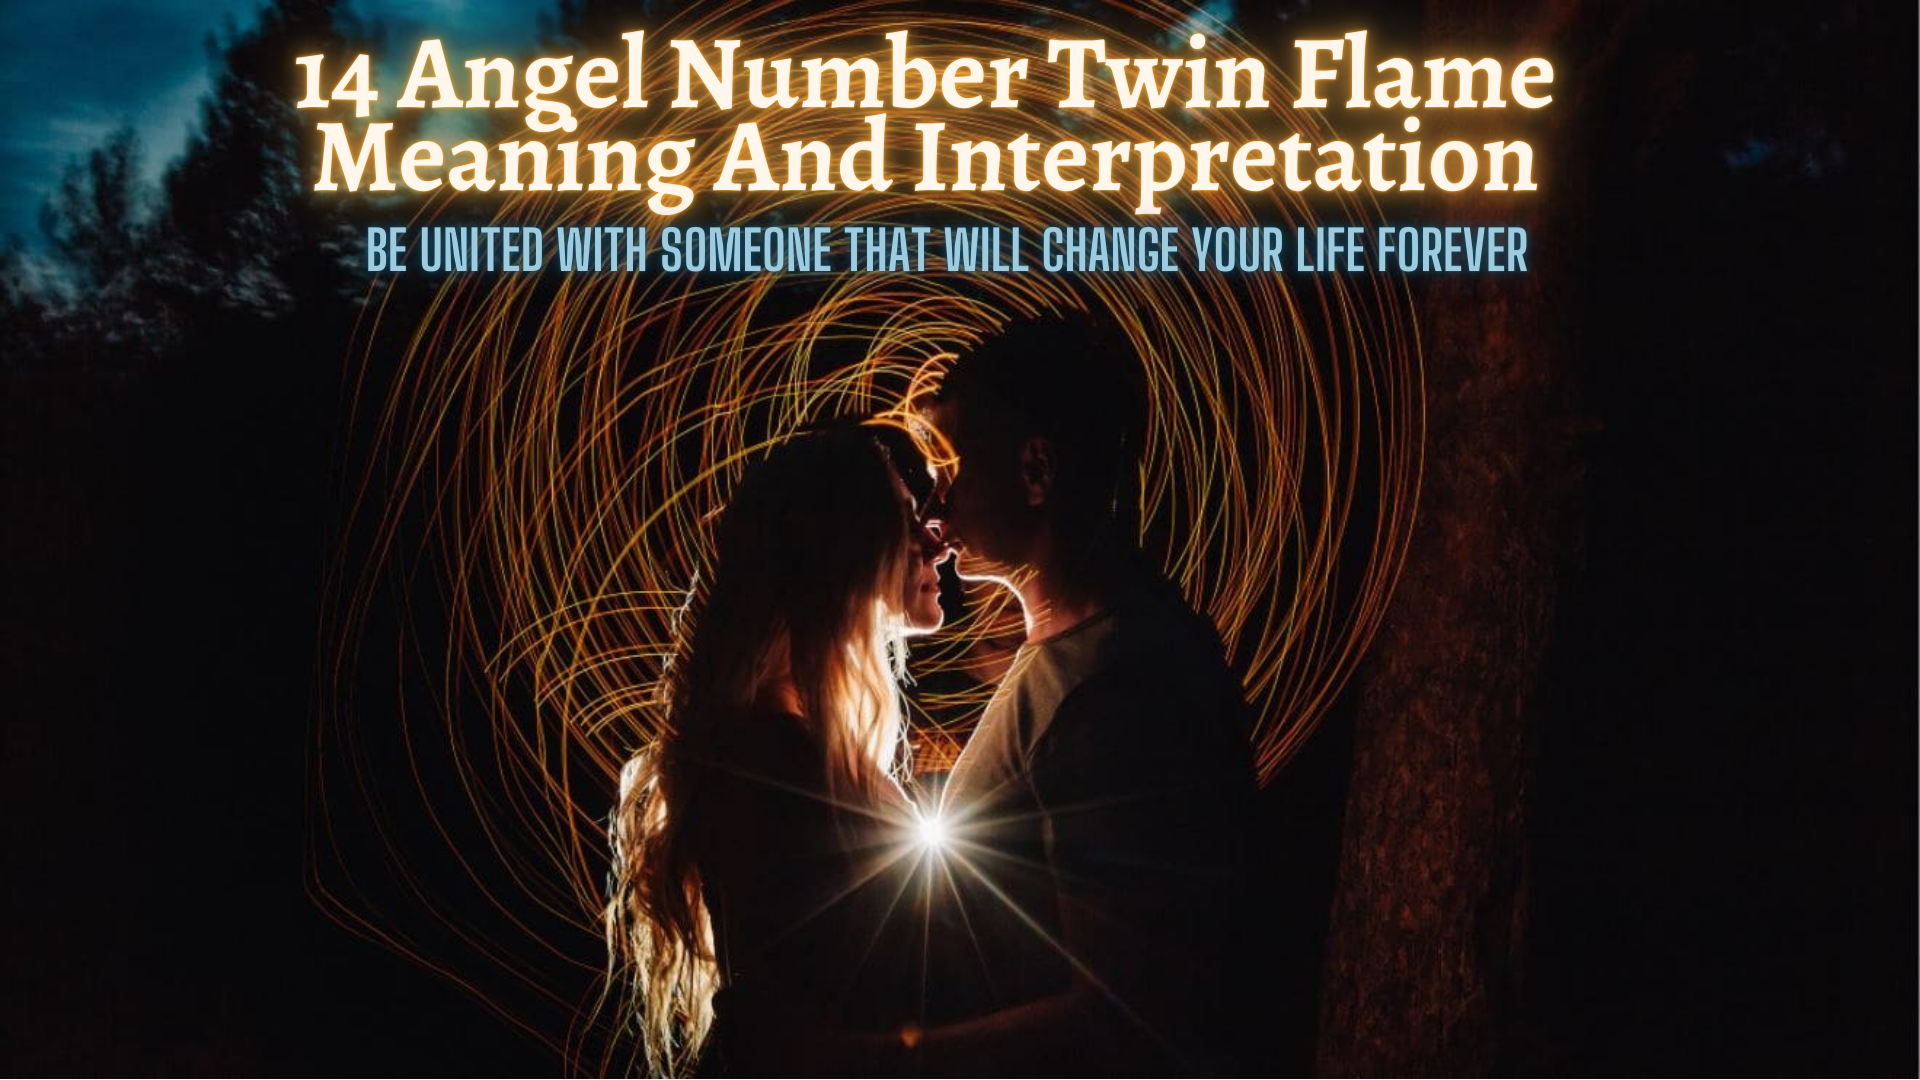 14 Angel Number Twin Flame Meaning And Interpretation - Be United With Someone That Will Change Your Life Forever